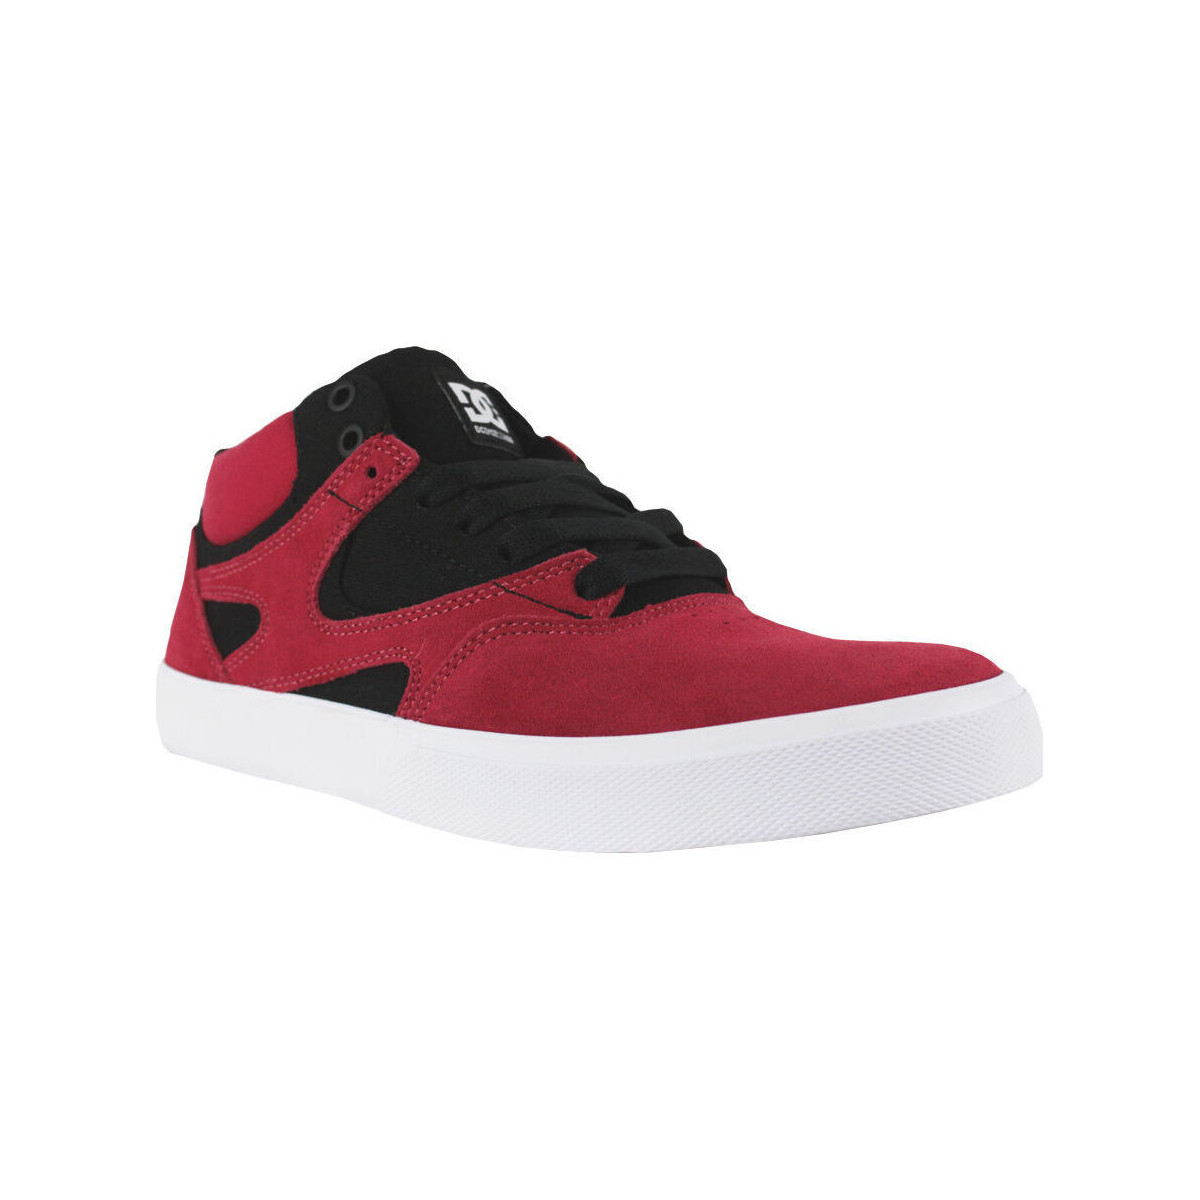 DC Shoes  Sneakers DC Shoes Kalis vulc mid ADYS300622 ATHLETIC RED/BLACK (ATR)